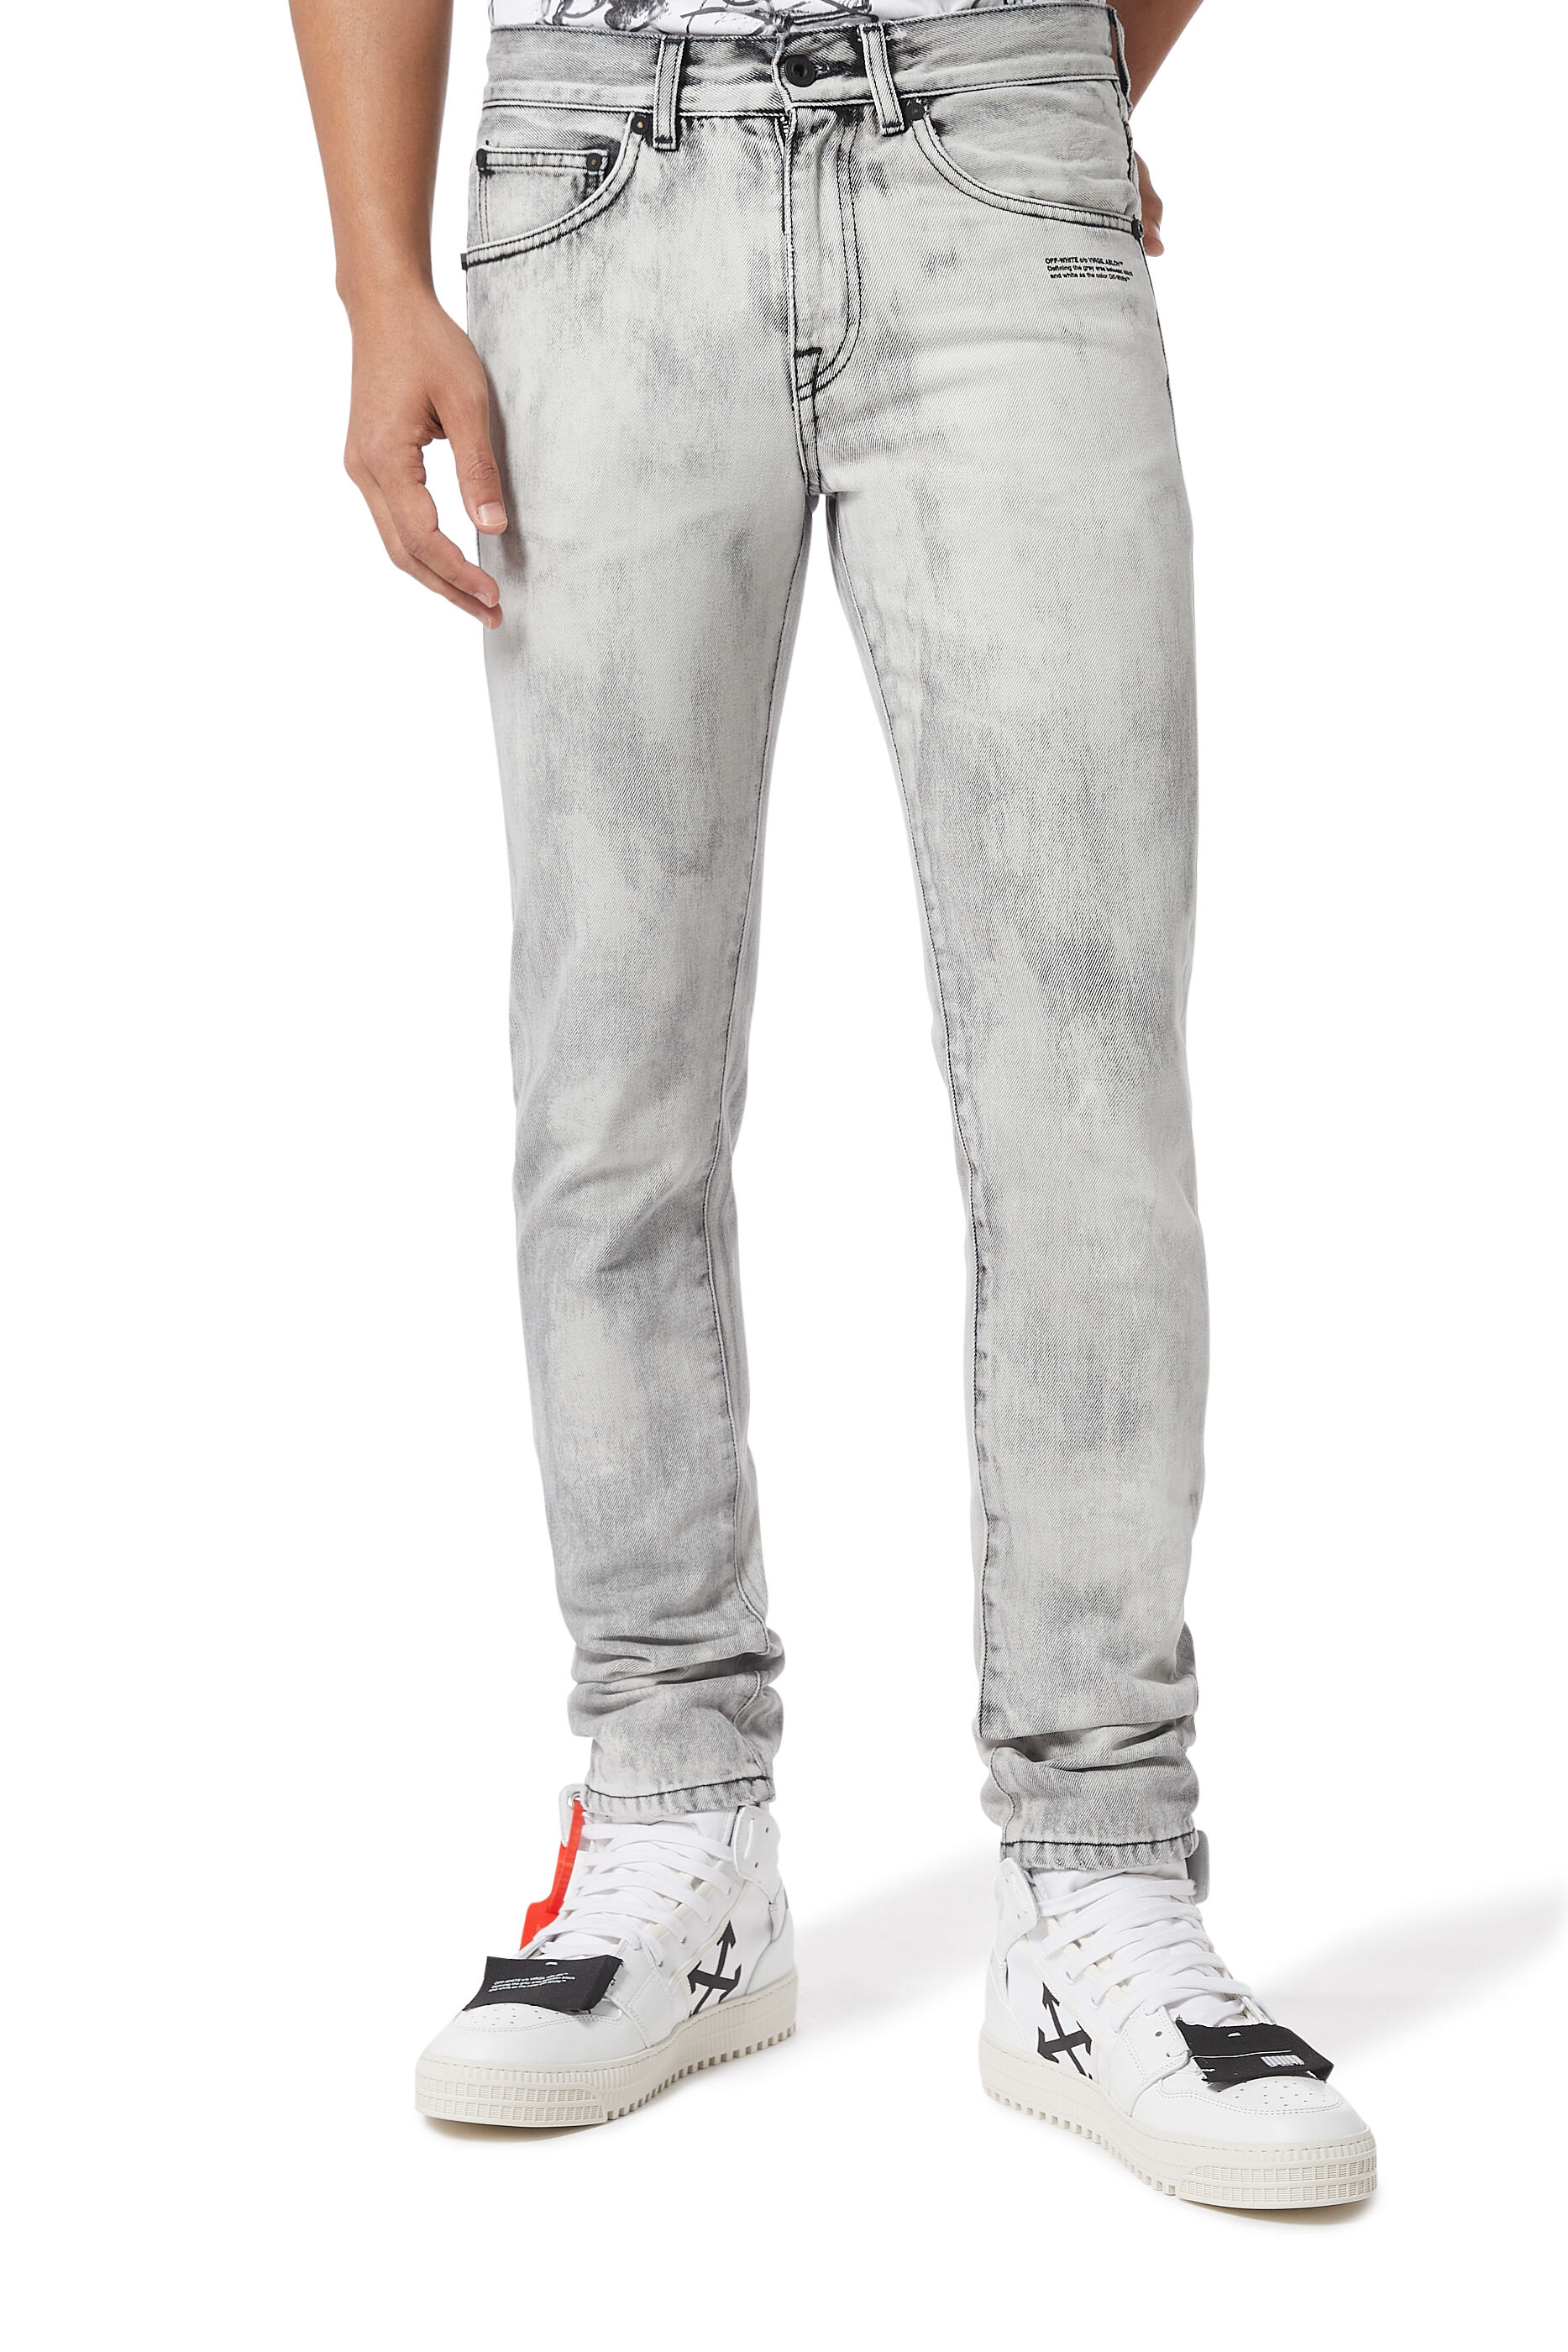 off white jeans mens sale